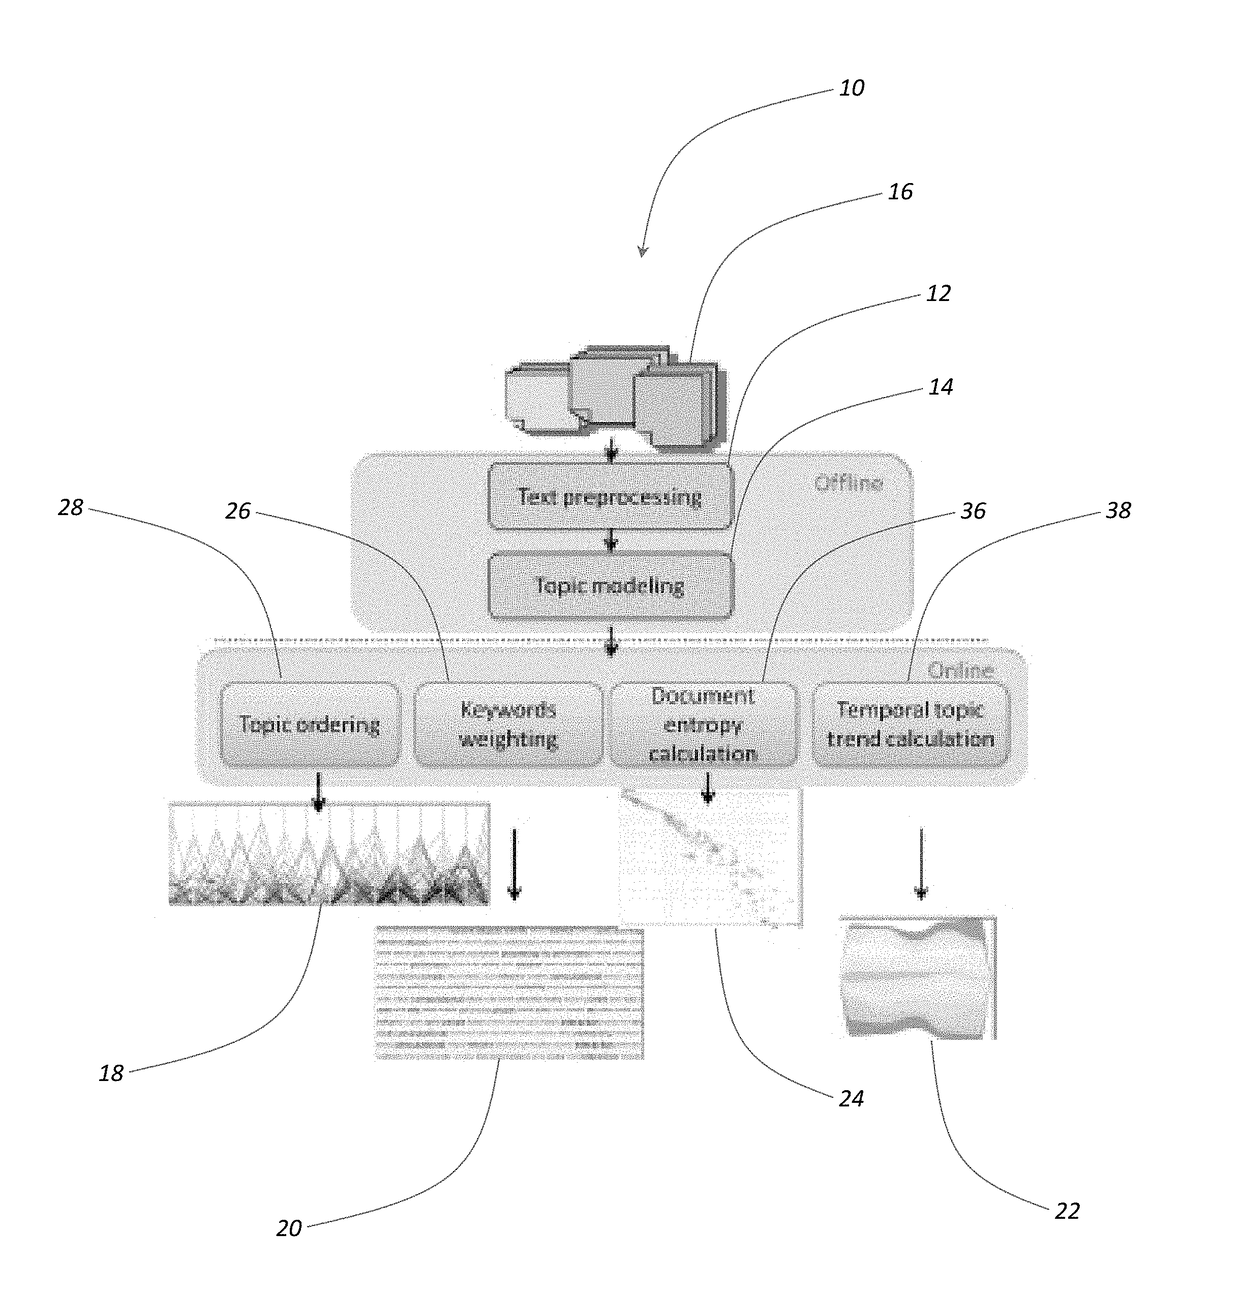 Artificial intelligence optimized unstructured data analytics systems and methods